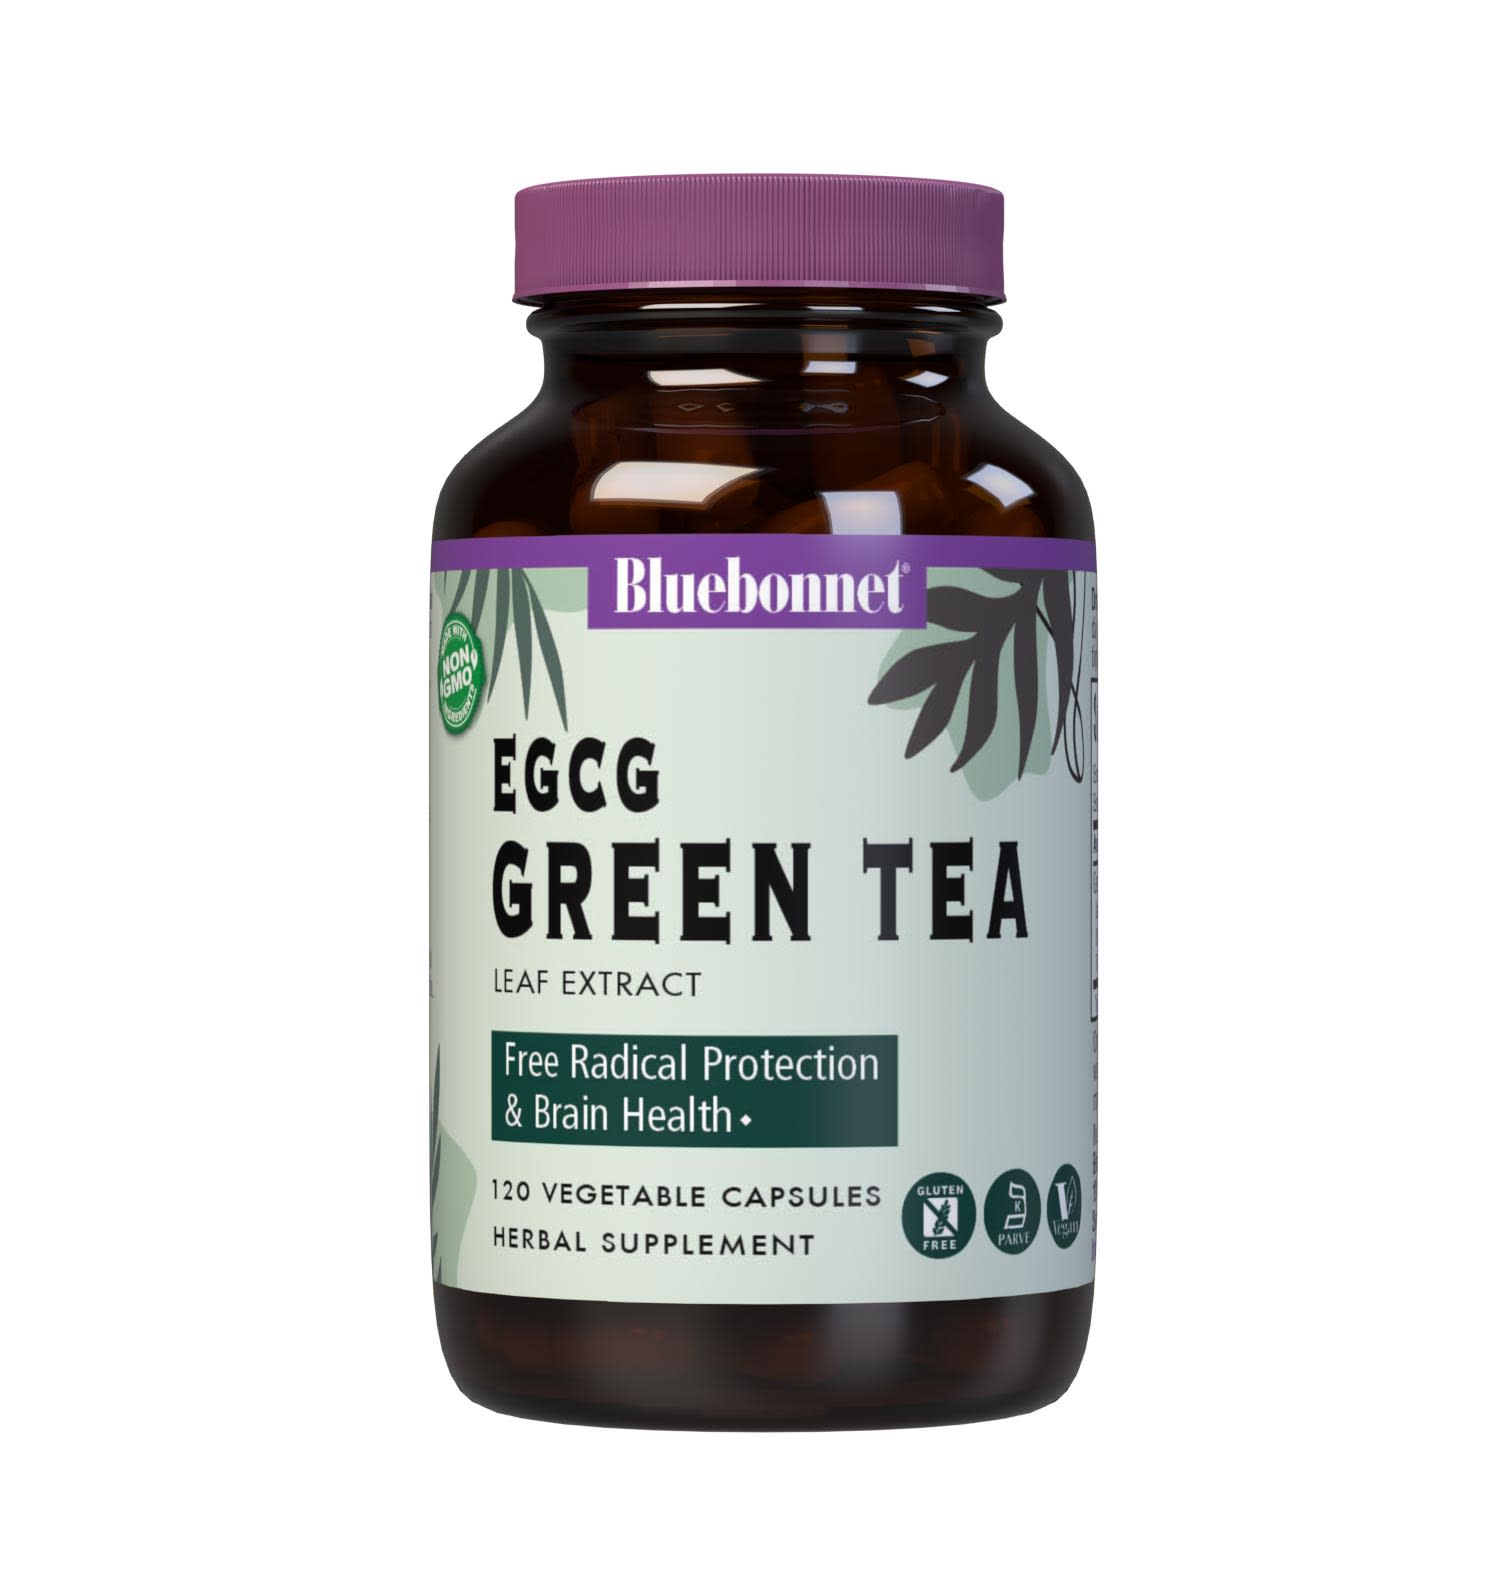 Bluebonnet’s EGCG Green Tea Leaf Extract 120 Vegetable Capsules contain a standardized extract of total polyphenols, catechins and EGCG, the most researched active constituents found in green tea. A clean and gentle water-based extraction method is employed to capture and preserve green tea’s most valuable components. #size_120 count